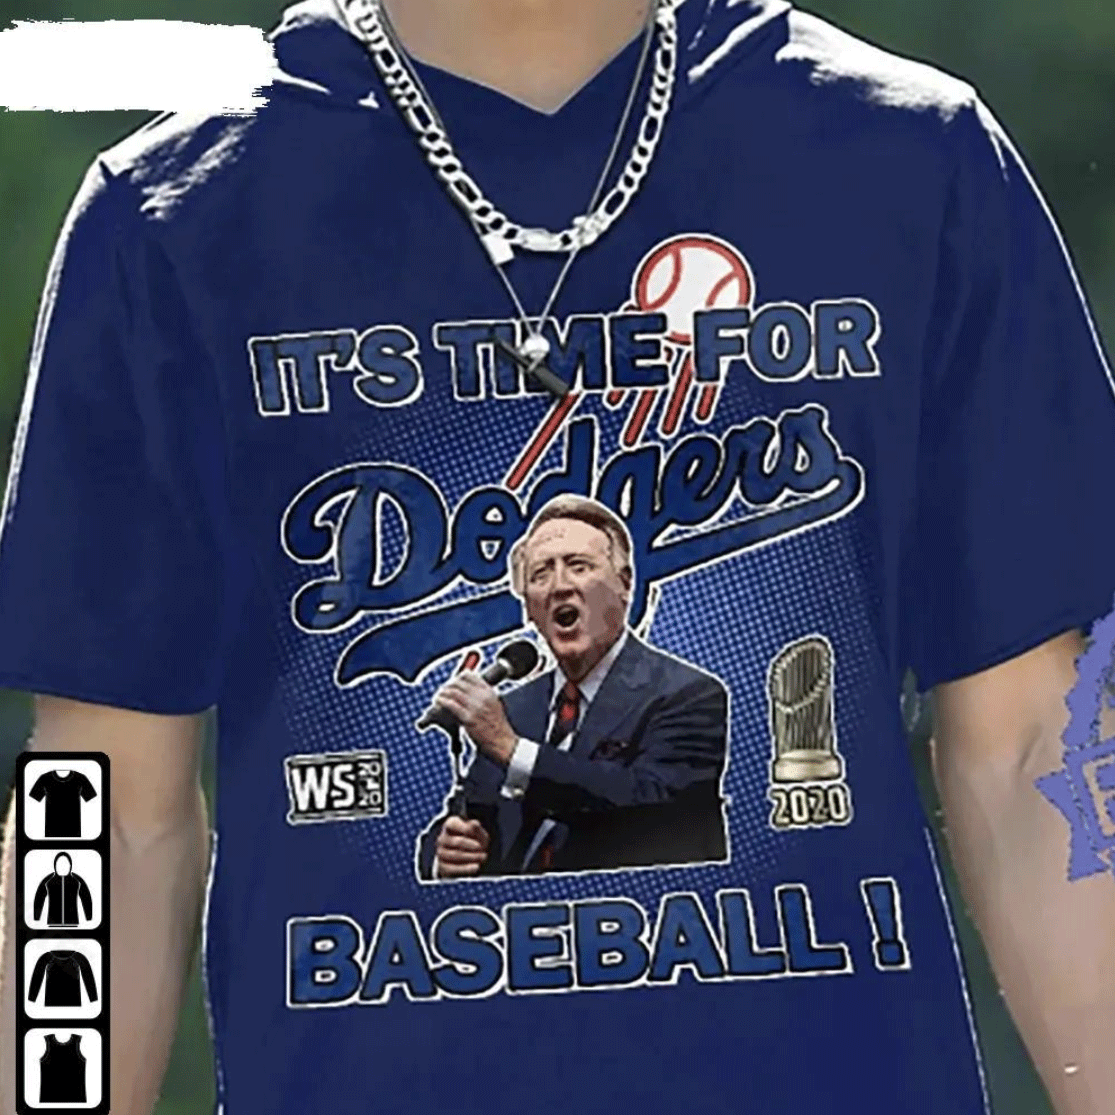 It'S Time For Dodgers Baseball Vin Scully Shirt Vin Scully Dodgers